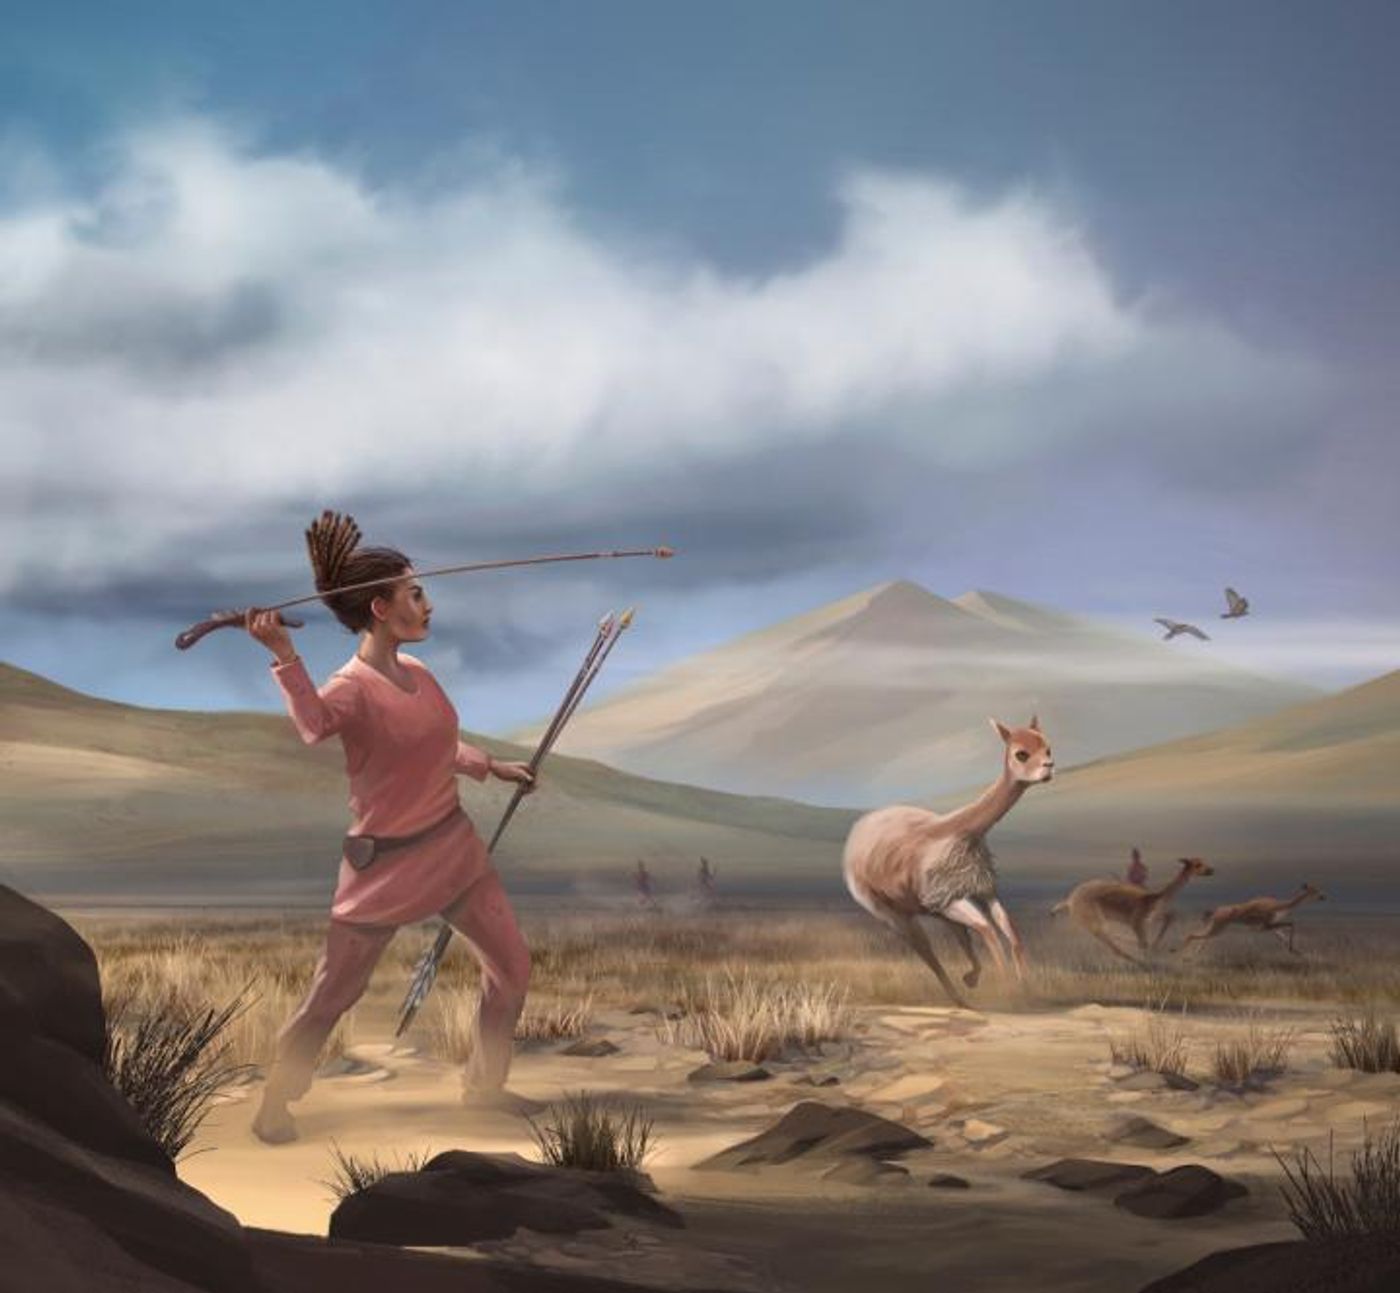 Illustration of female hunter depicting hunters who may have appeared in the Andes 9,000 years ago. / Credit: Matthew Verdolivo, UC Davis IET Academic Technology Services